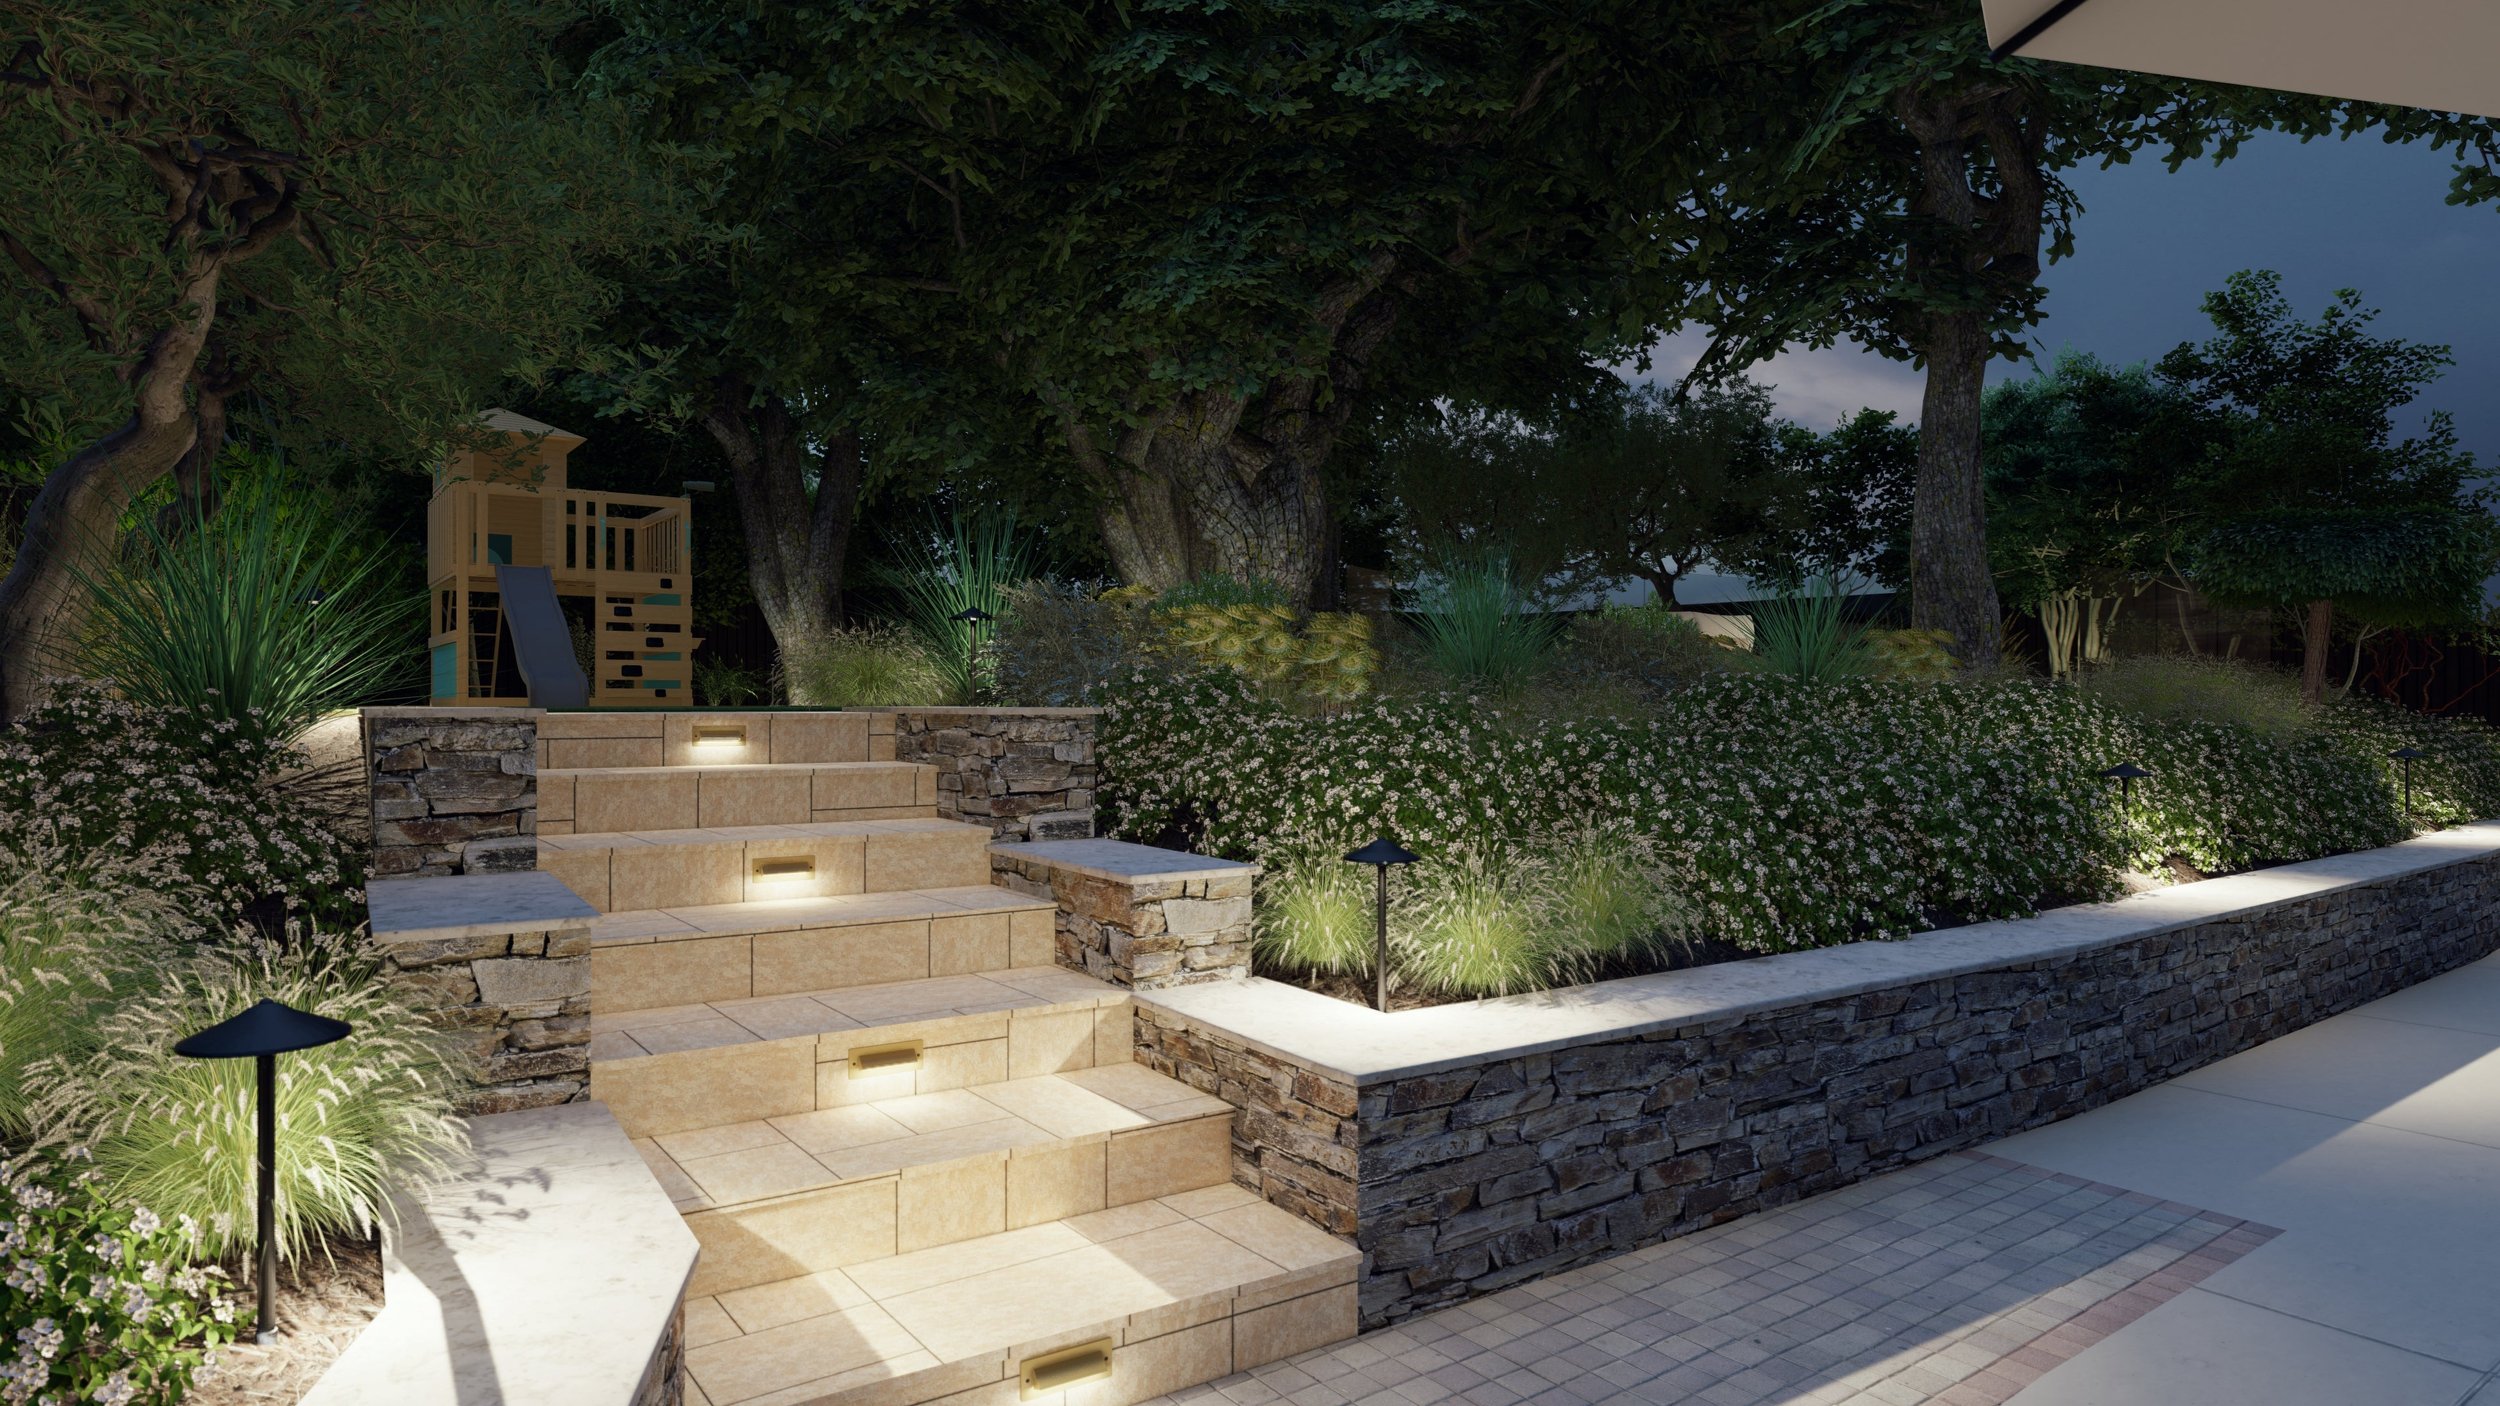 Path lights with glare-blocking covers sit above a retaining wall to highlight its seat cap. Recessed lights in the stair risers also incorporate covers to direct light onto the stair treads.